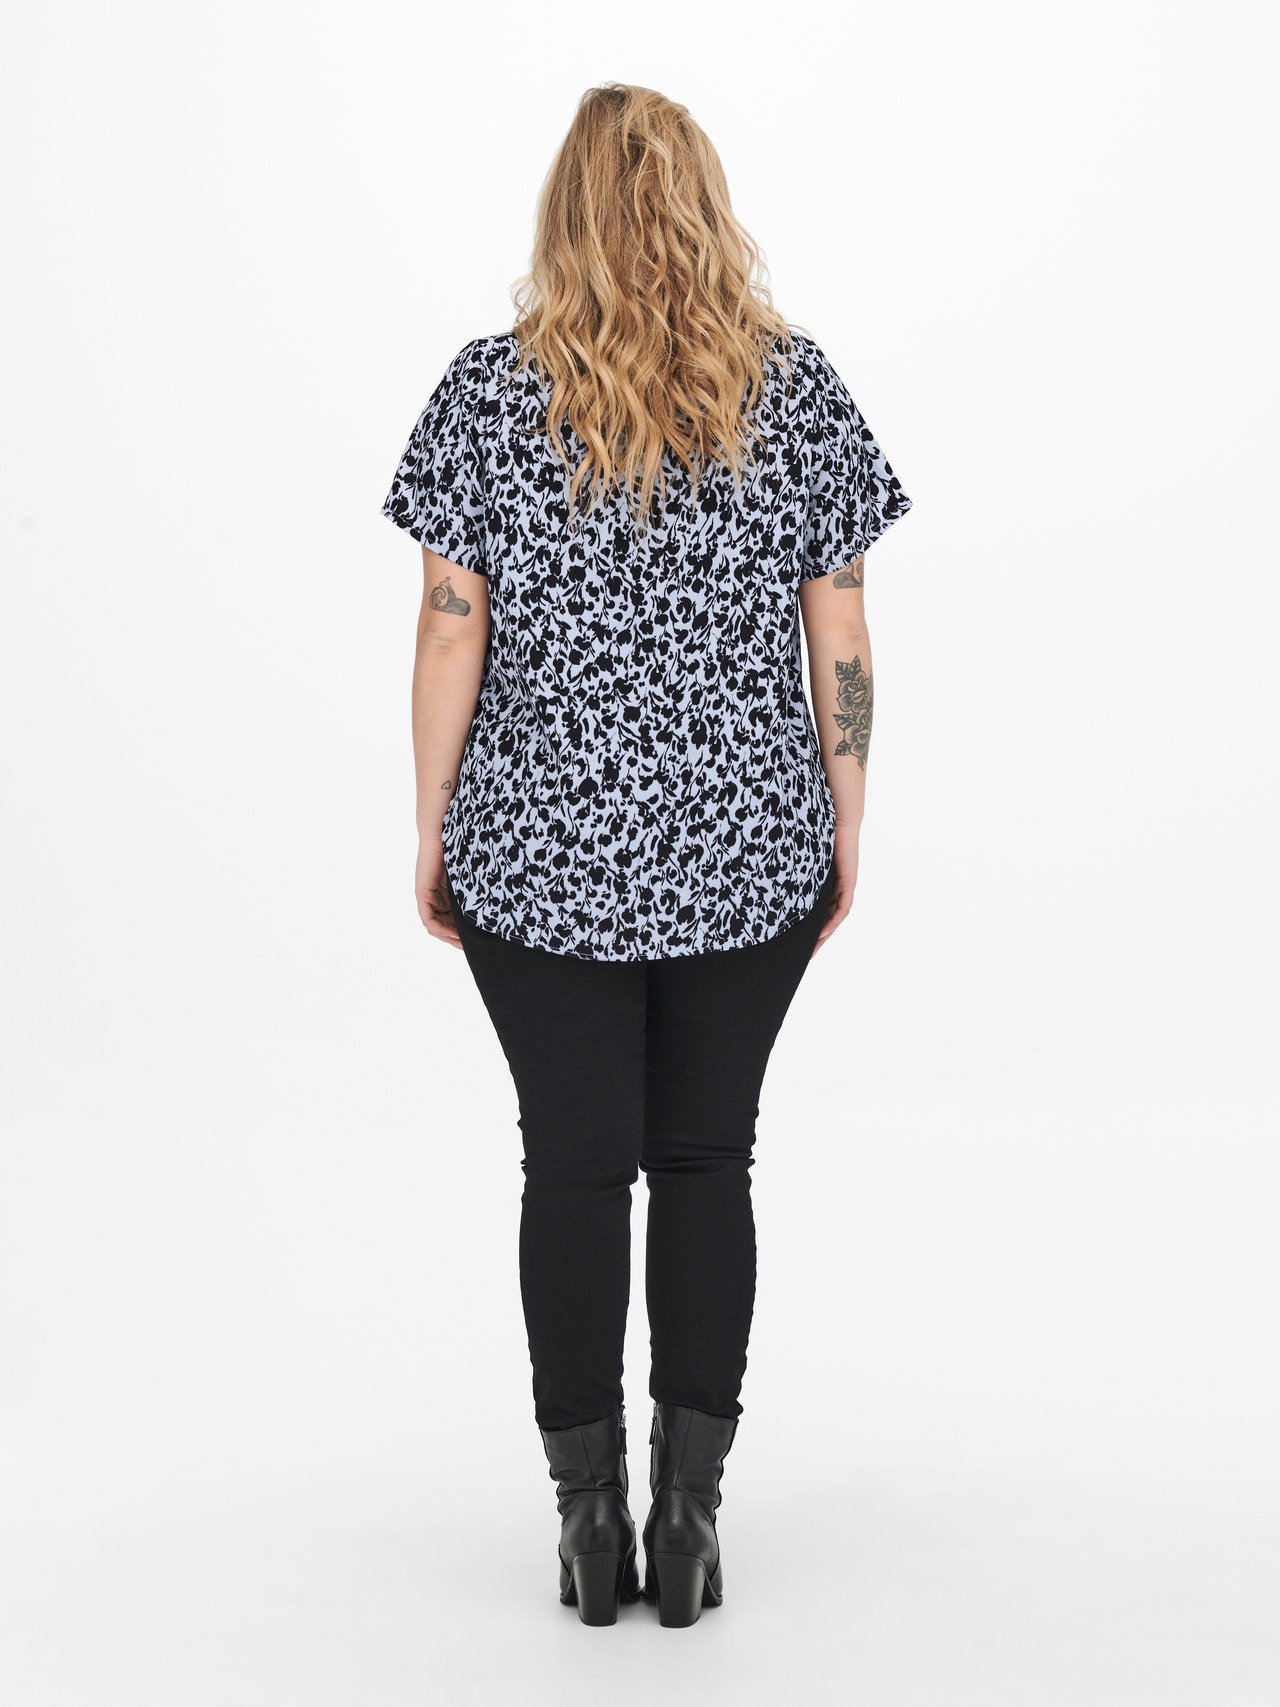 ONLY Curvy Short Sleeved Top -Eventide - 15251106